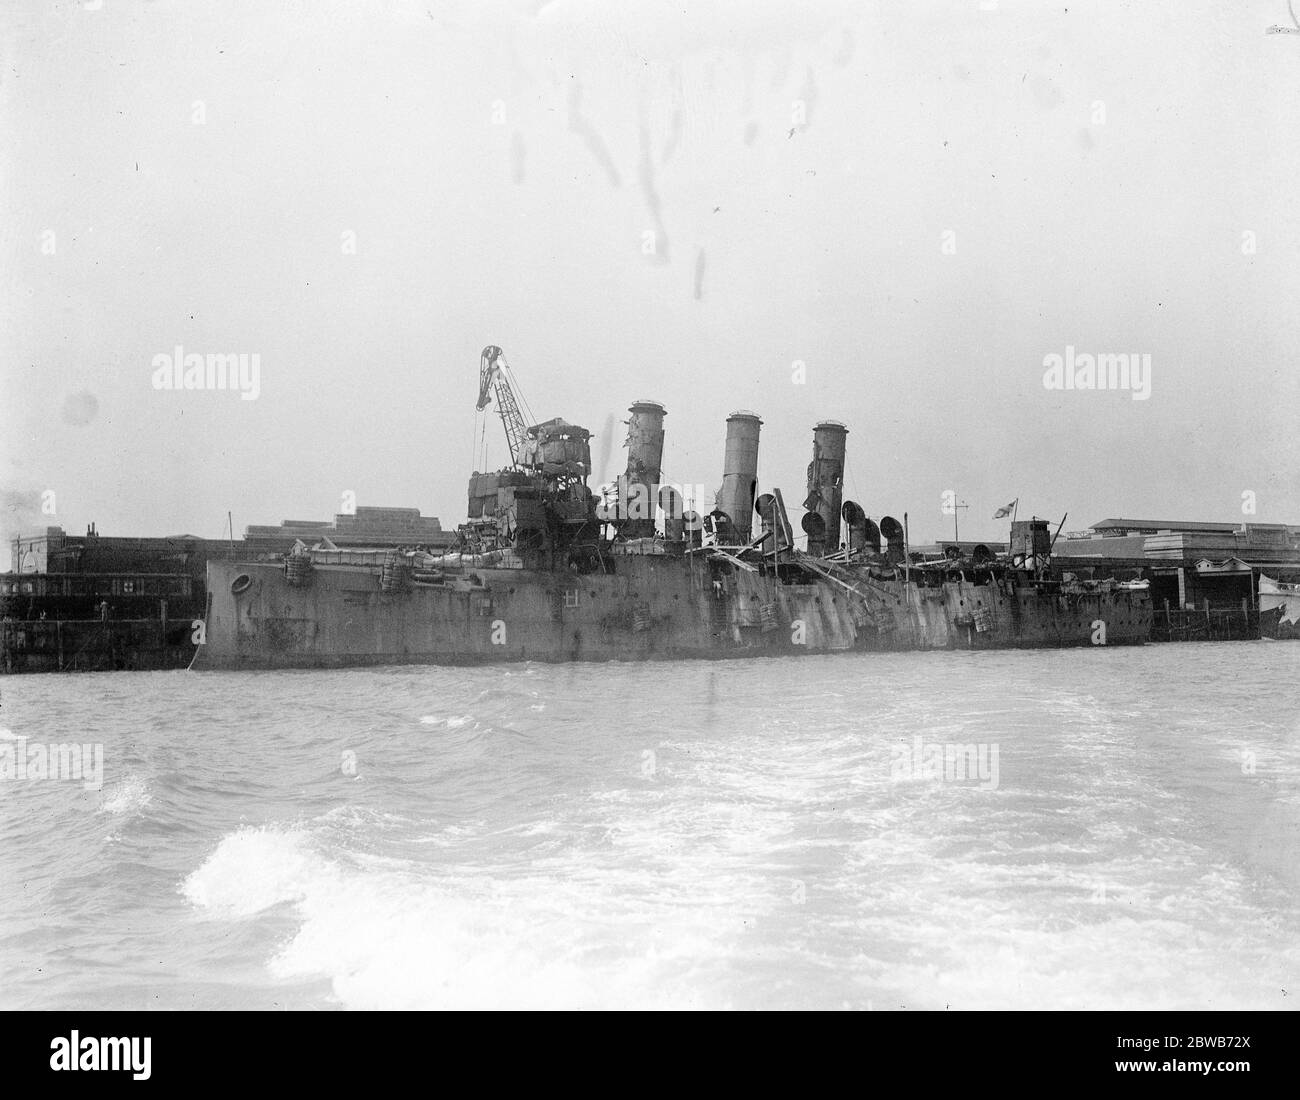 The Great Naval raid on Zeebrugge . HMS Vindictive a British protected cruiser . On 23 April 1918 she was in fierce action at Zeebrugge when she went alongside the Mole and her upperworks were badly damaged. The badly damaged HMS Vindictive seen here on her return . 1918 Stock Photo